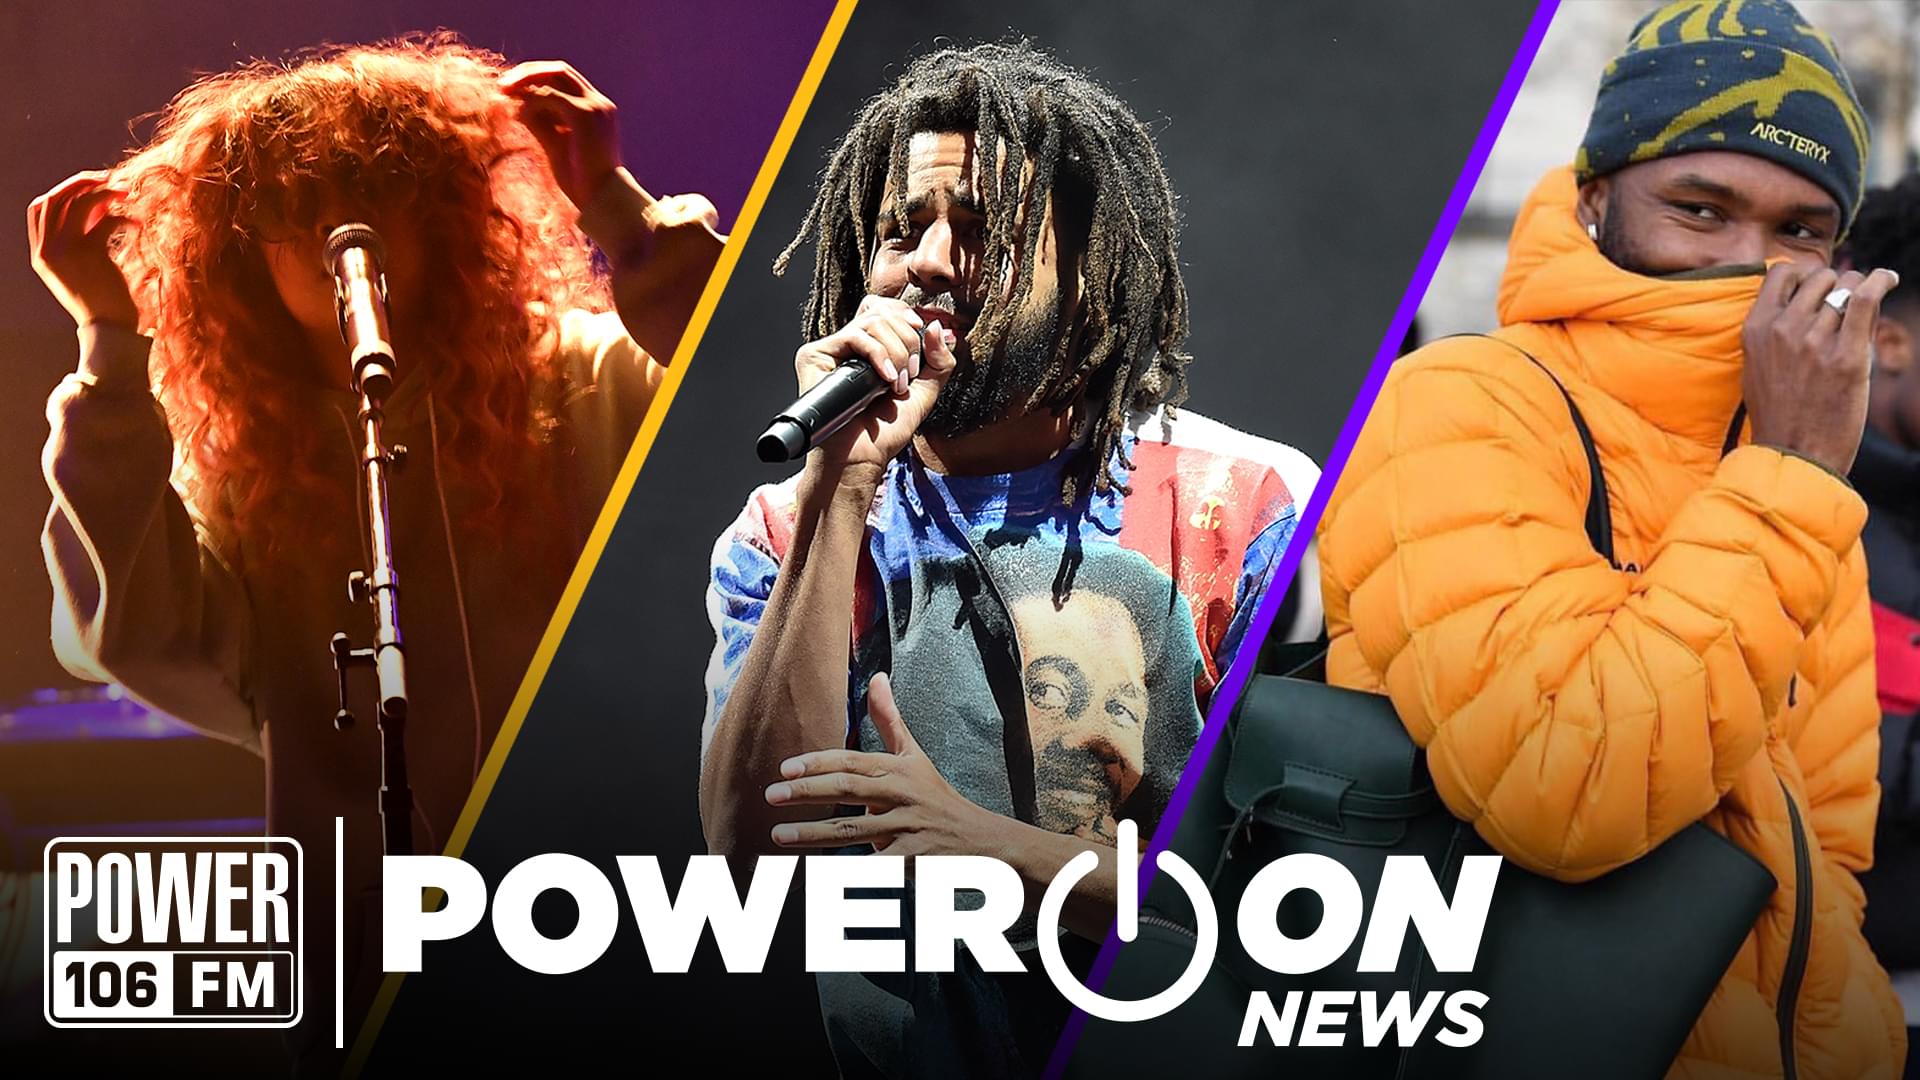 #PowerOn: J. Cole Drops “Middle Child” + Chris Brown Cleared of Paris Allegations